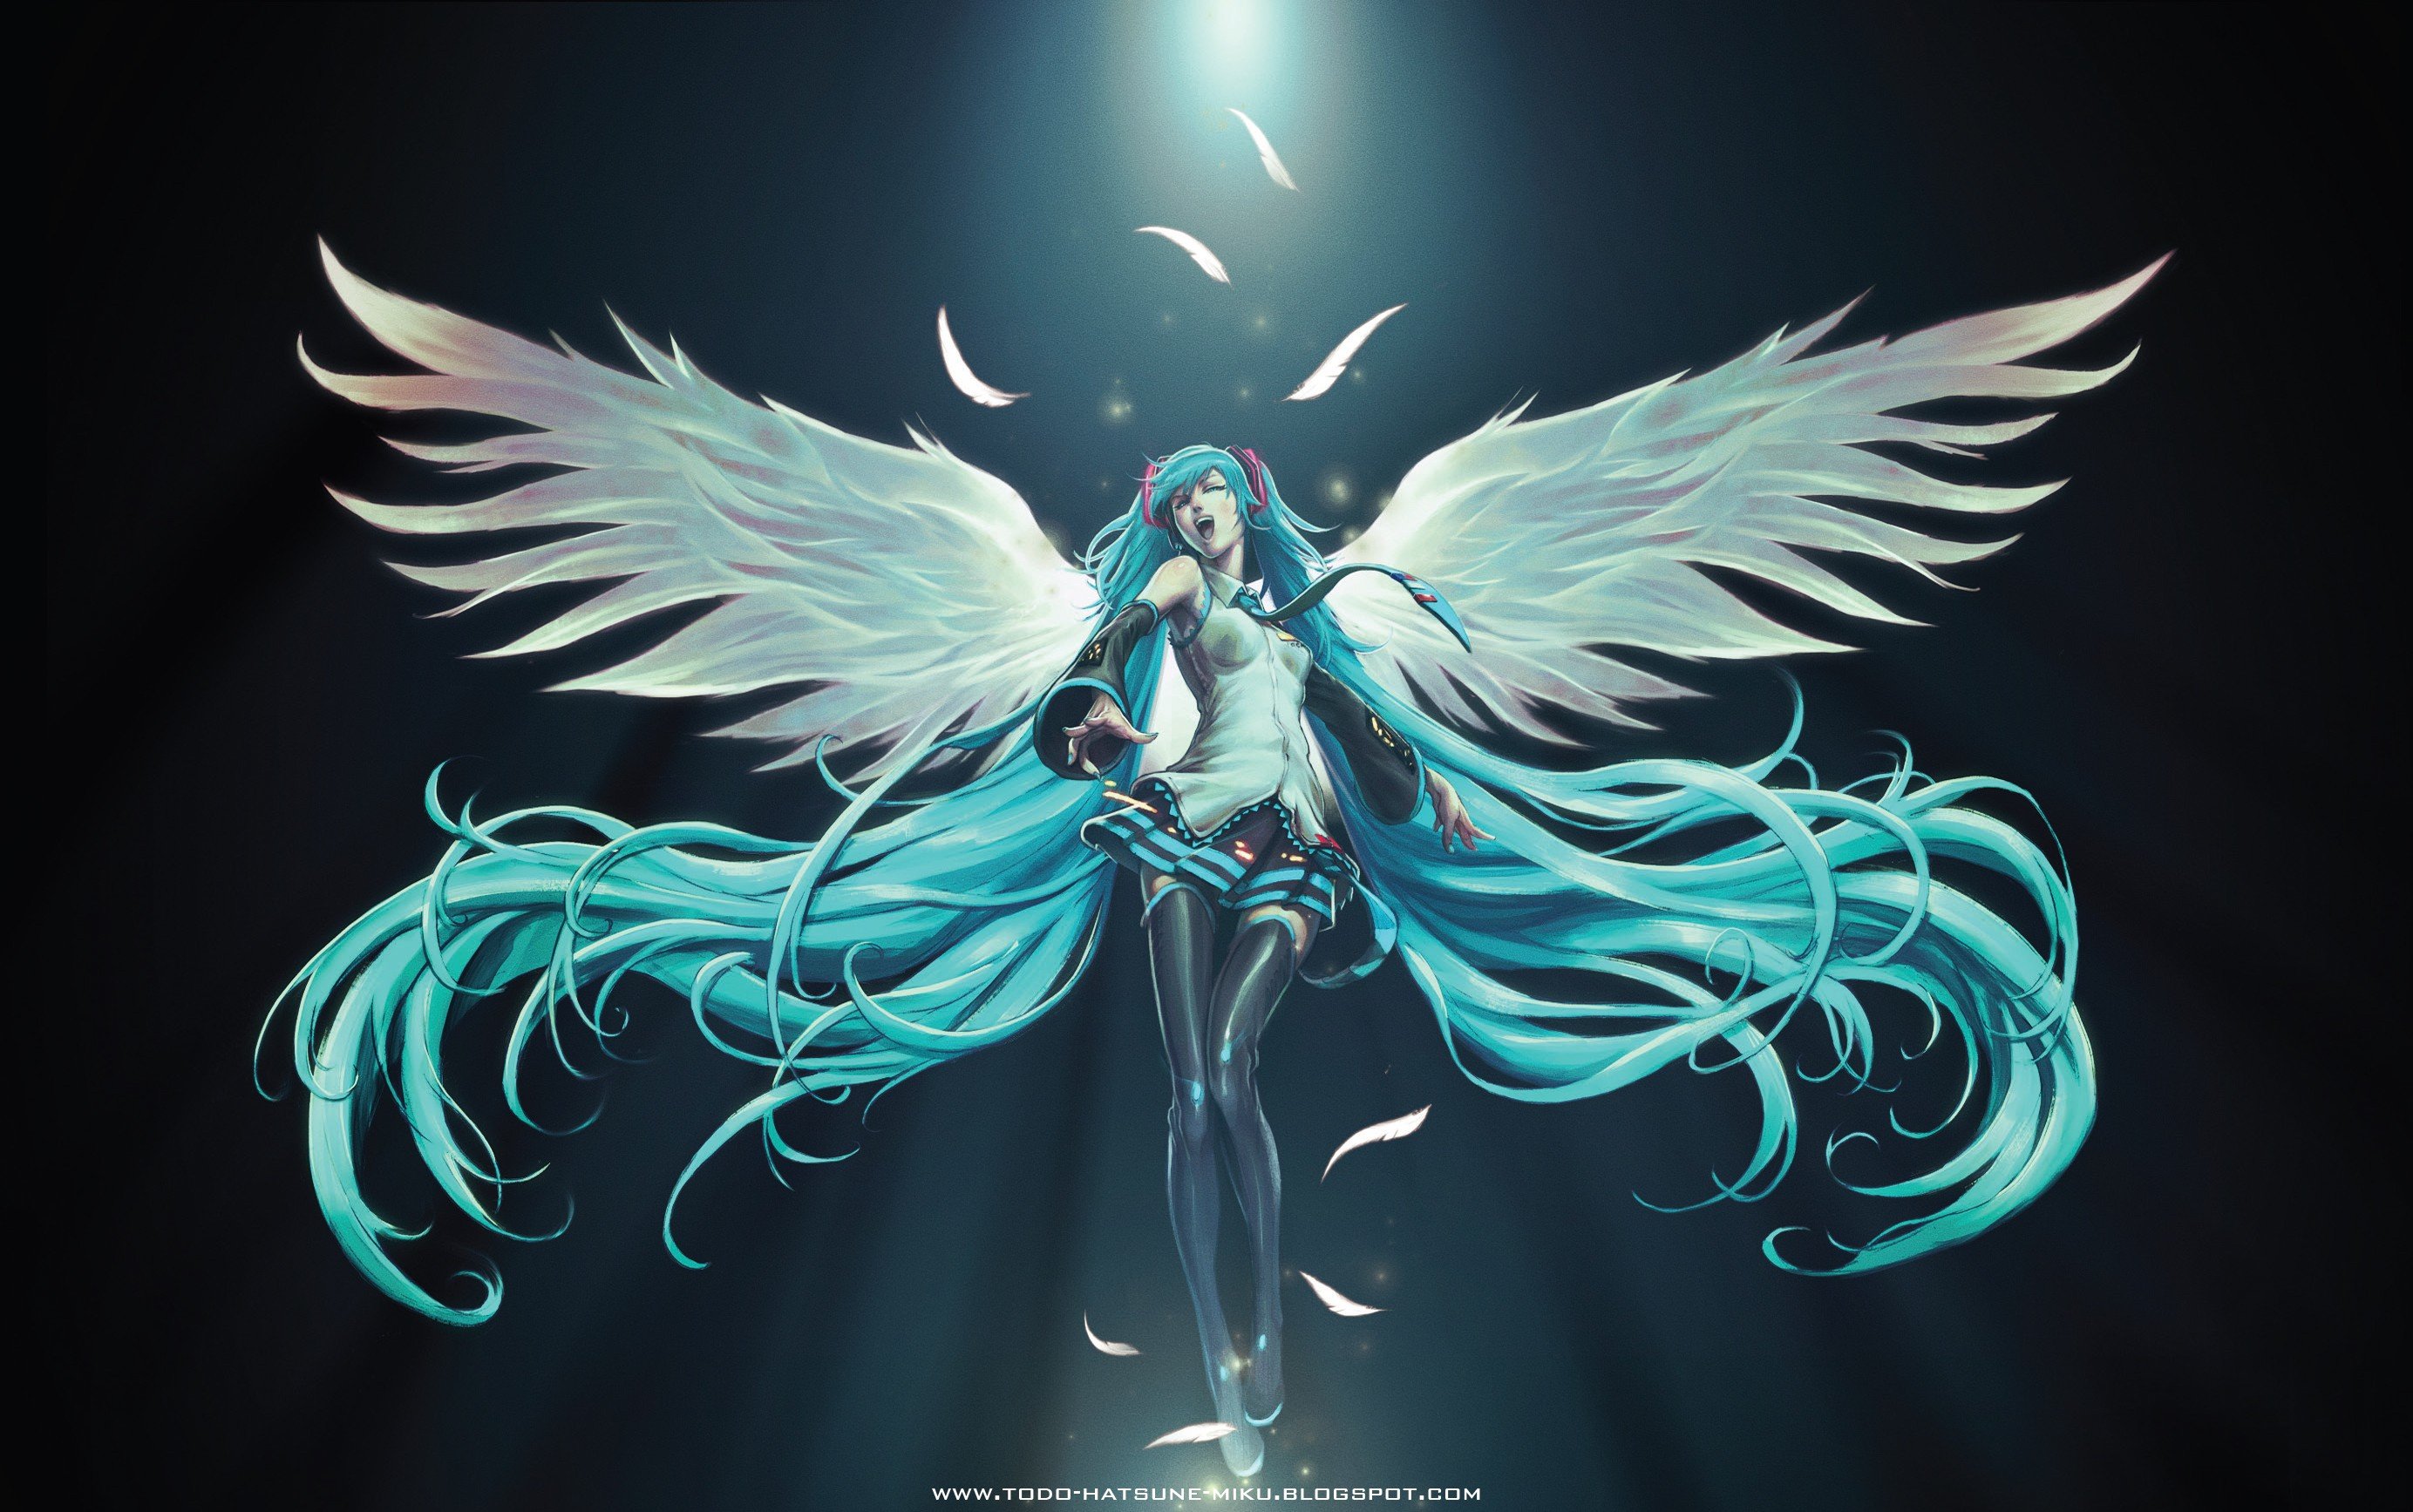 Hatsune Miku Vocaloid Wings Hd Wallpapers Desktop And Mobile Images 